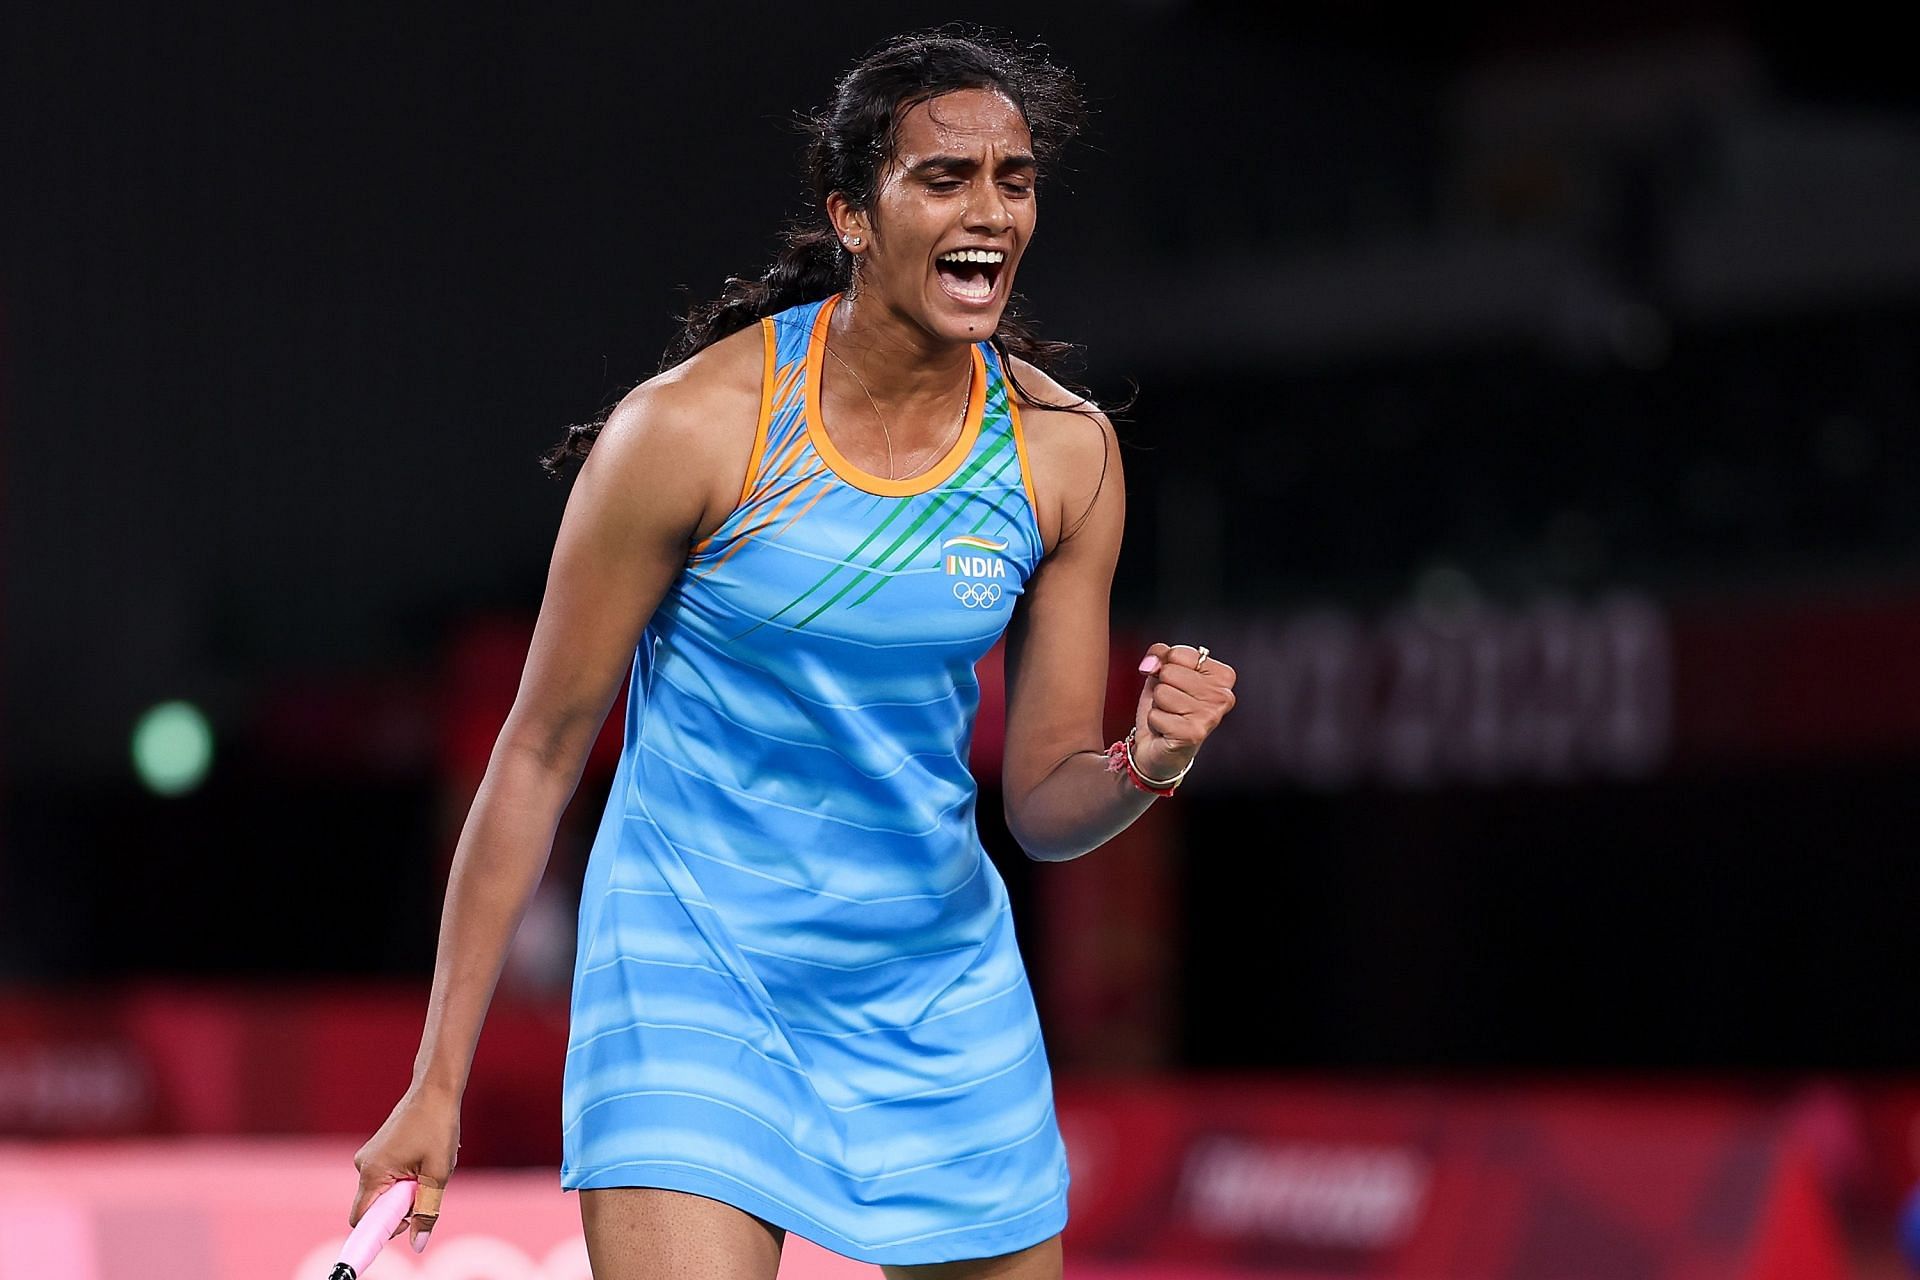 BWF World Tour Finals 2021, PV Sindhu vs Yvonne Li Where to watch, TV schedule, live stream details, and more